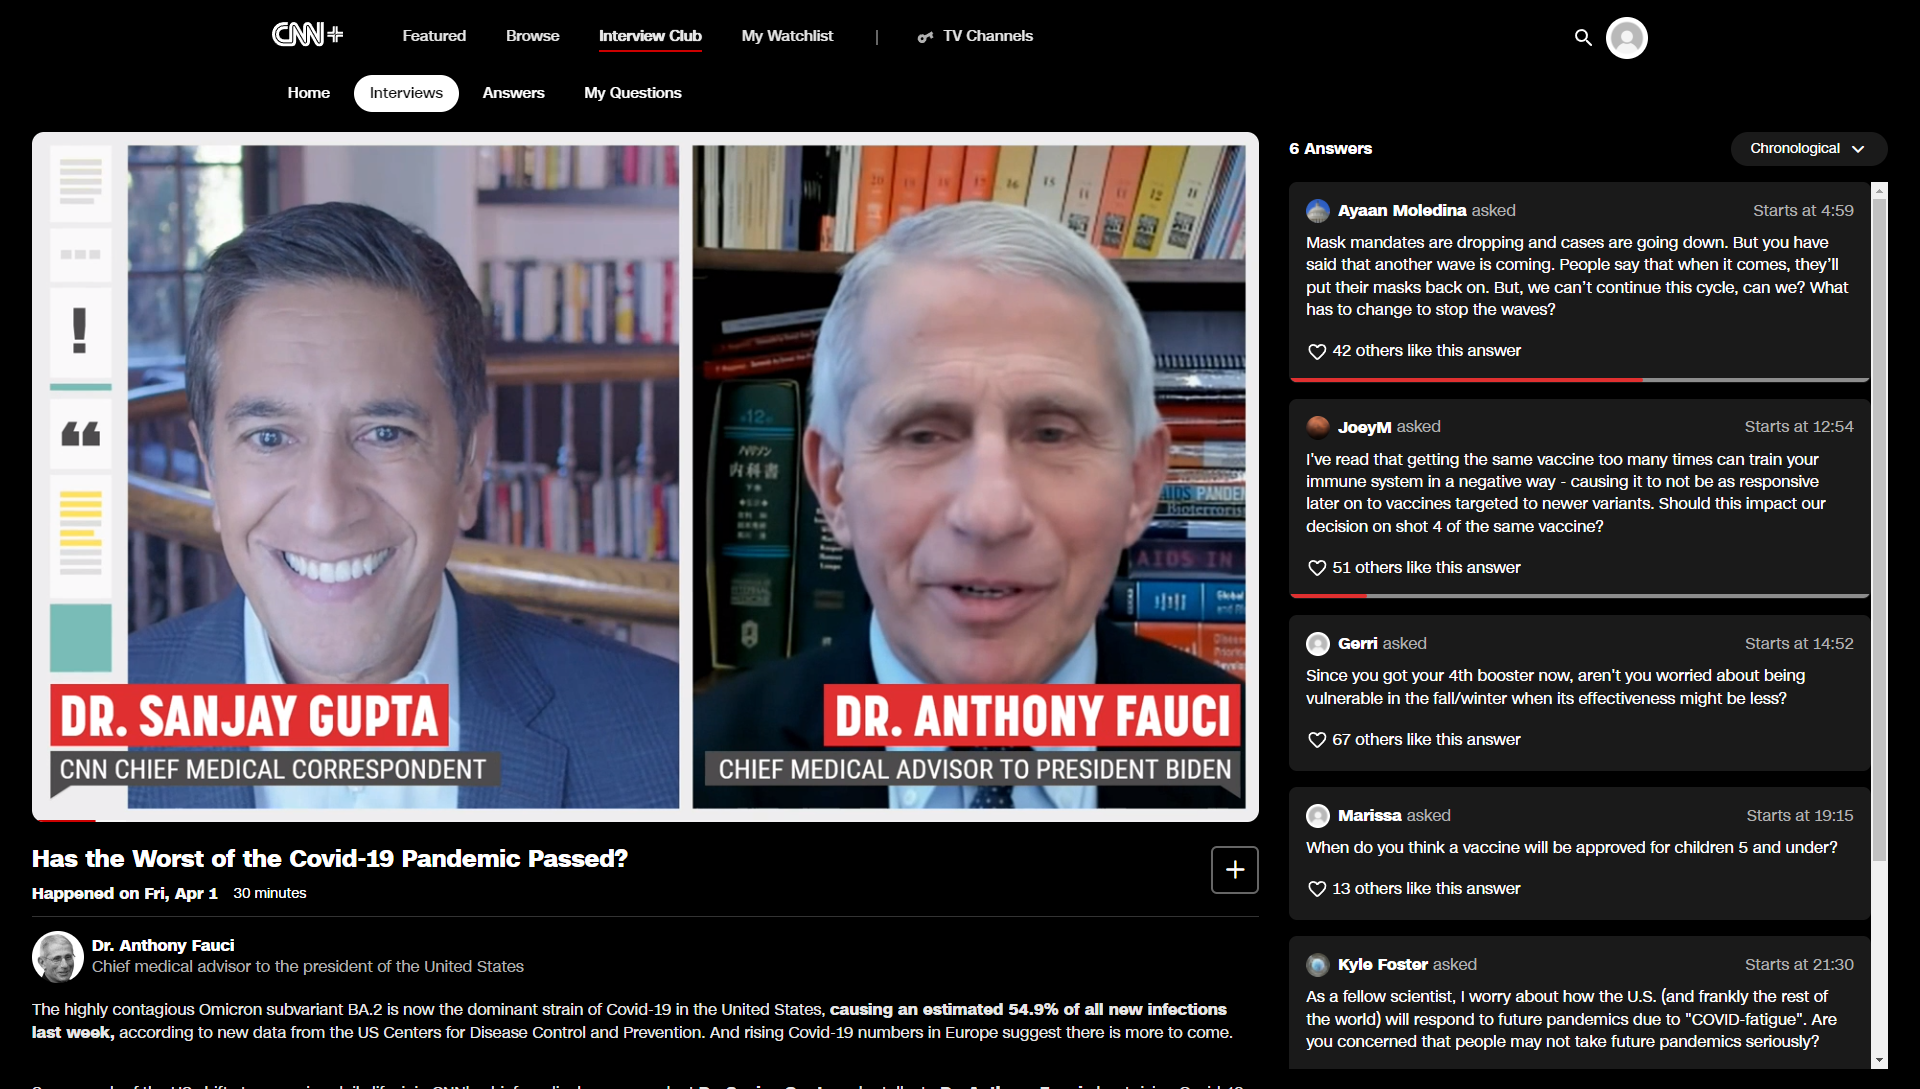 A screenshot from CNN's Interview Club, showing Dr. Sanjay Gupta interviewing Dr. Anthony Fauci. Interview questions, submitted and upvoted by the community, are listed toward the right.